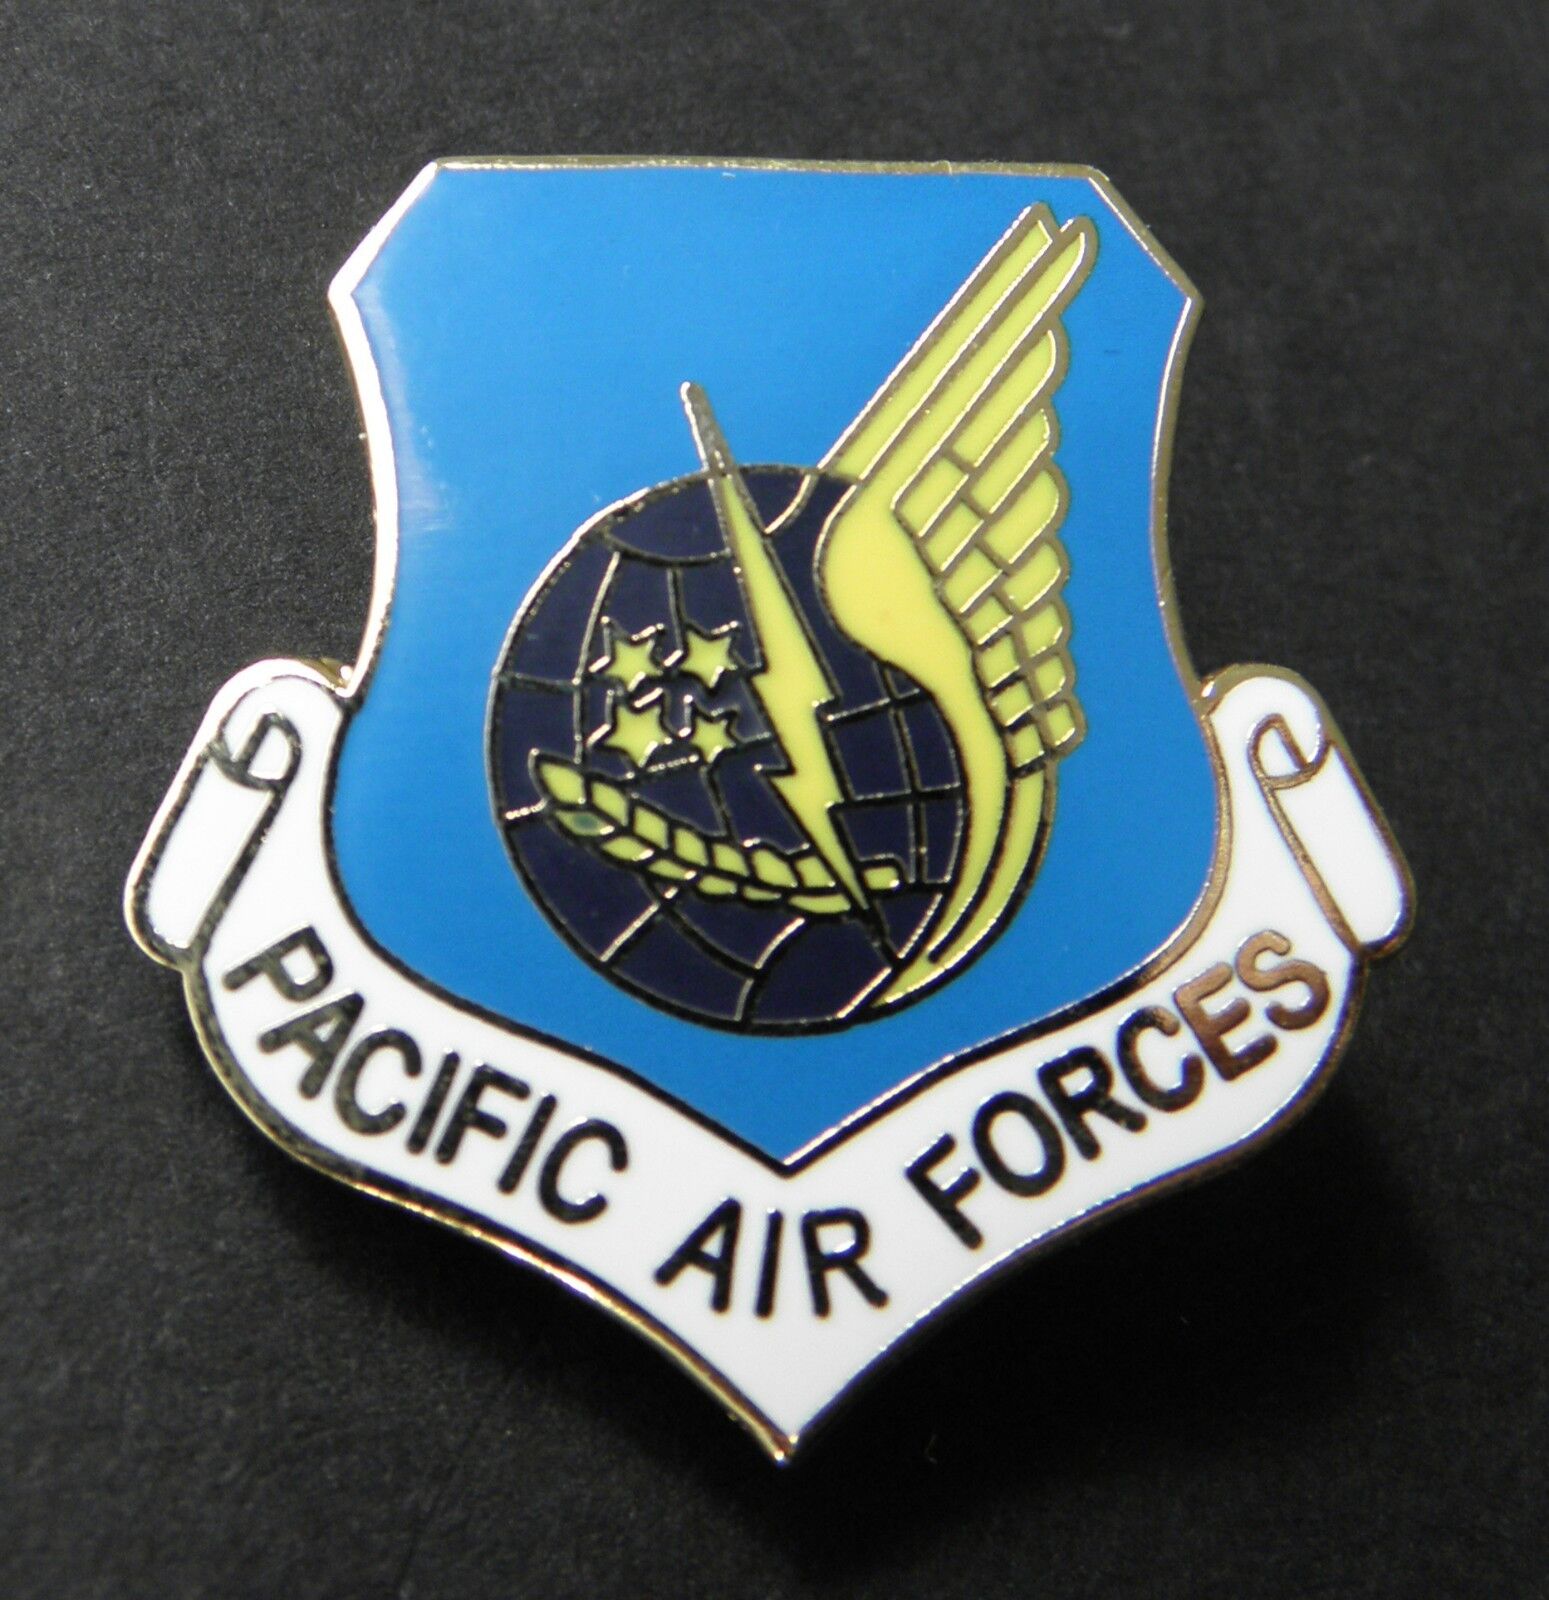 PACIFIC AIR FORCES USAF AIR FORCE SHIELD LAPEL PIN BADGE 1 INCH